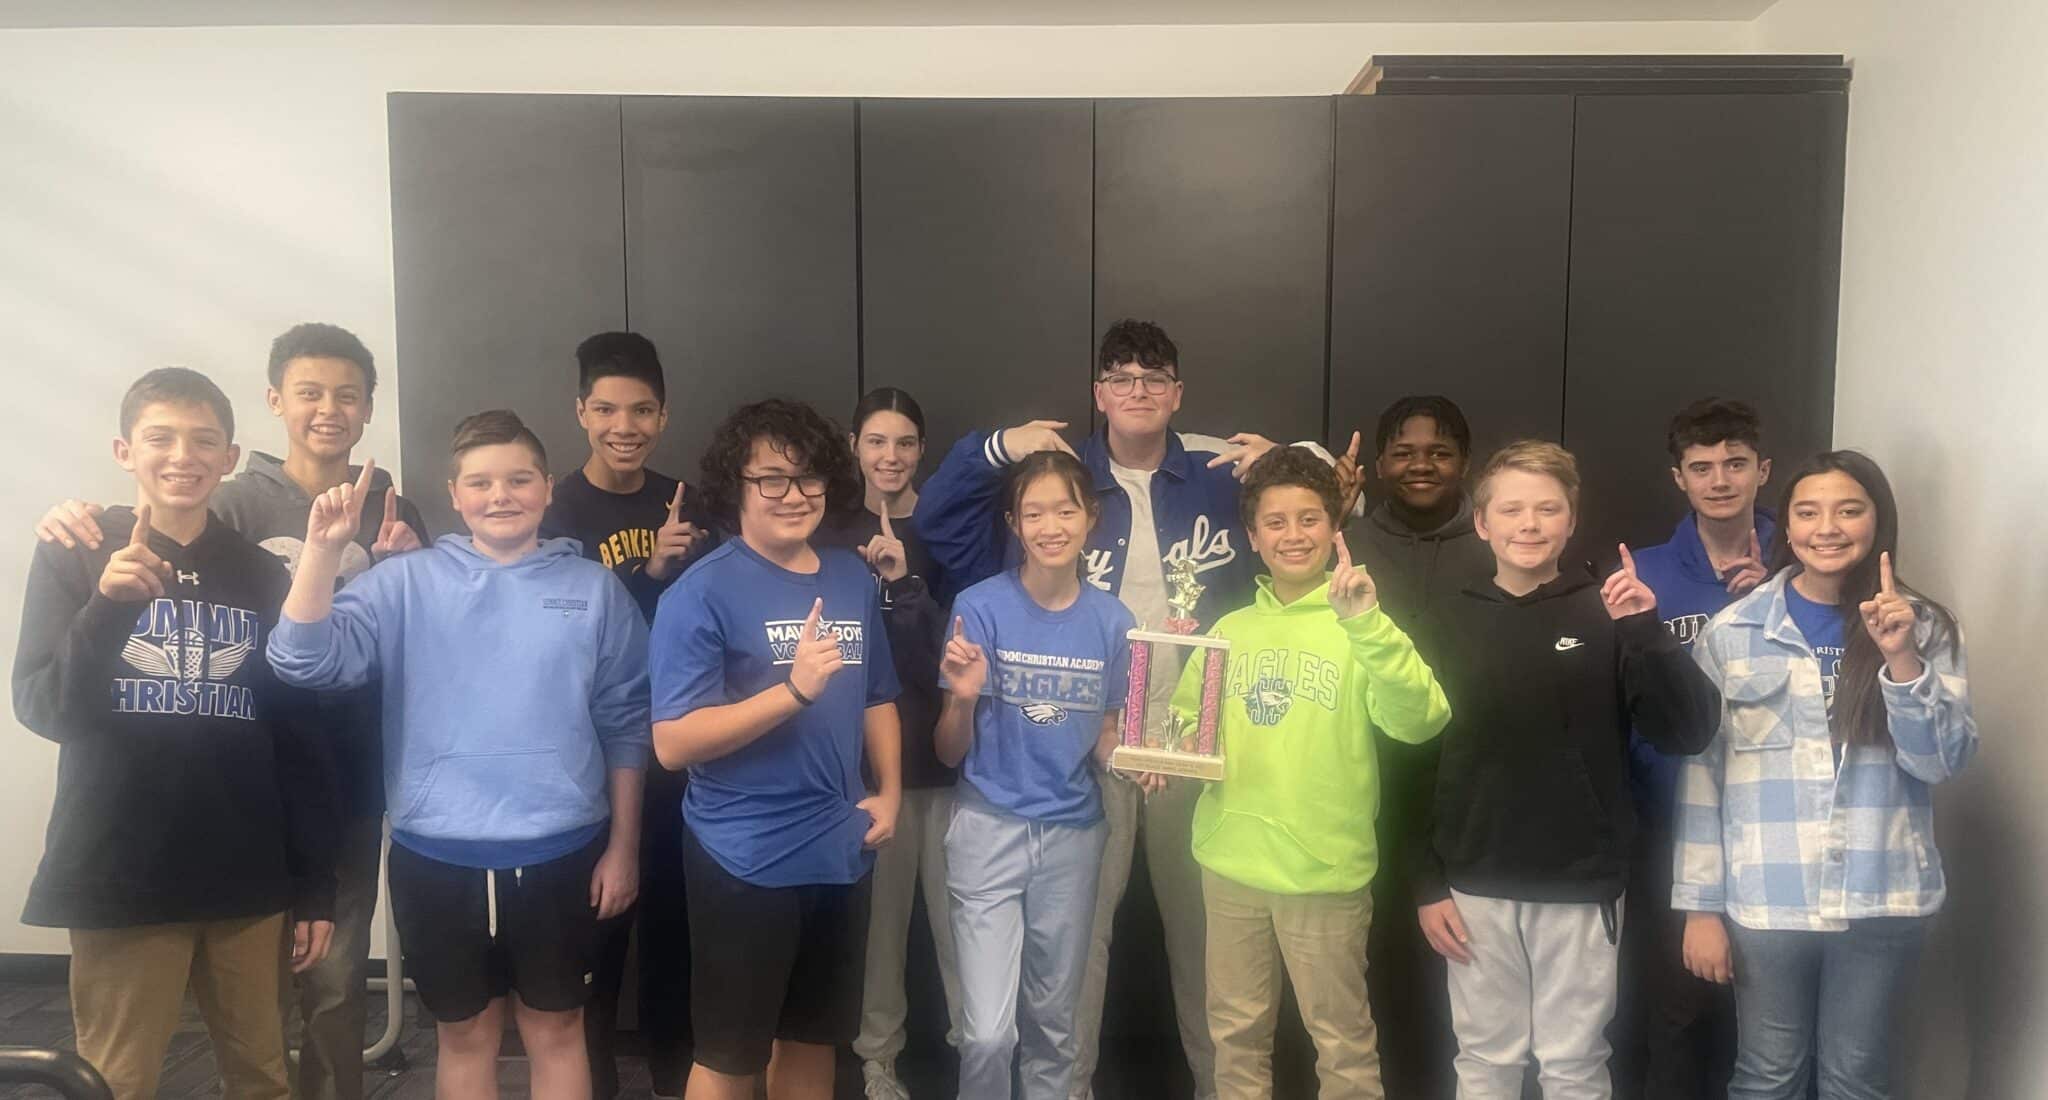 SCA’s Junior High Speech and Debate team recently took first place in the small school division during their first tournament at Paul Kinder Middle School in Blue Springs.